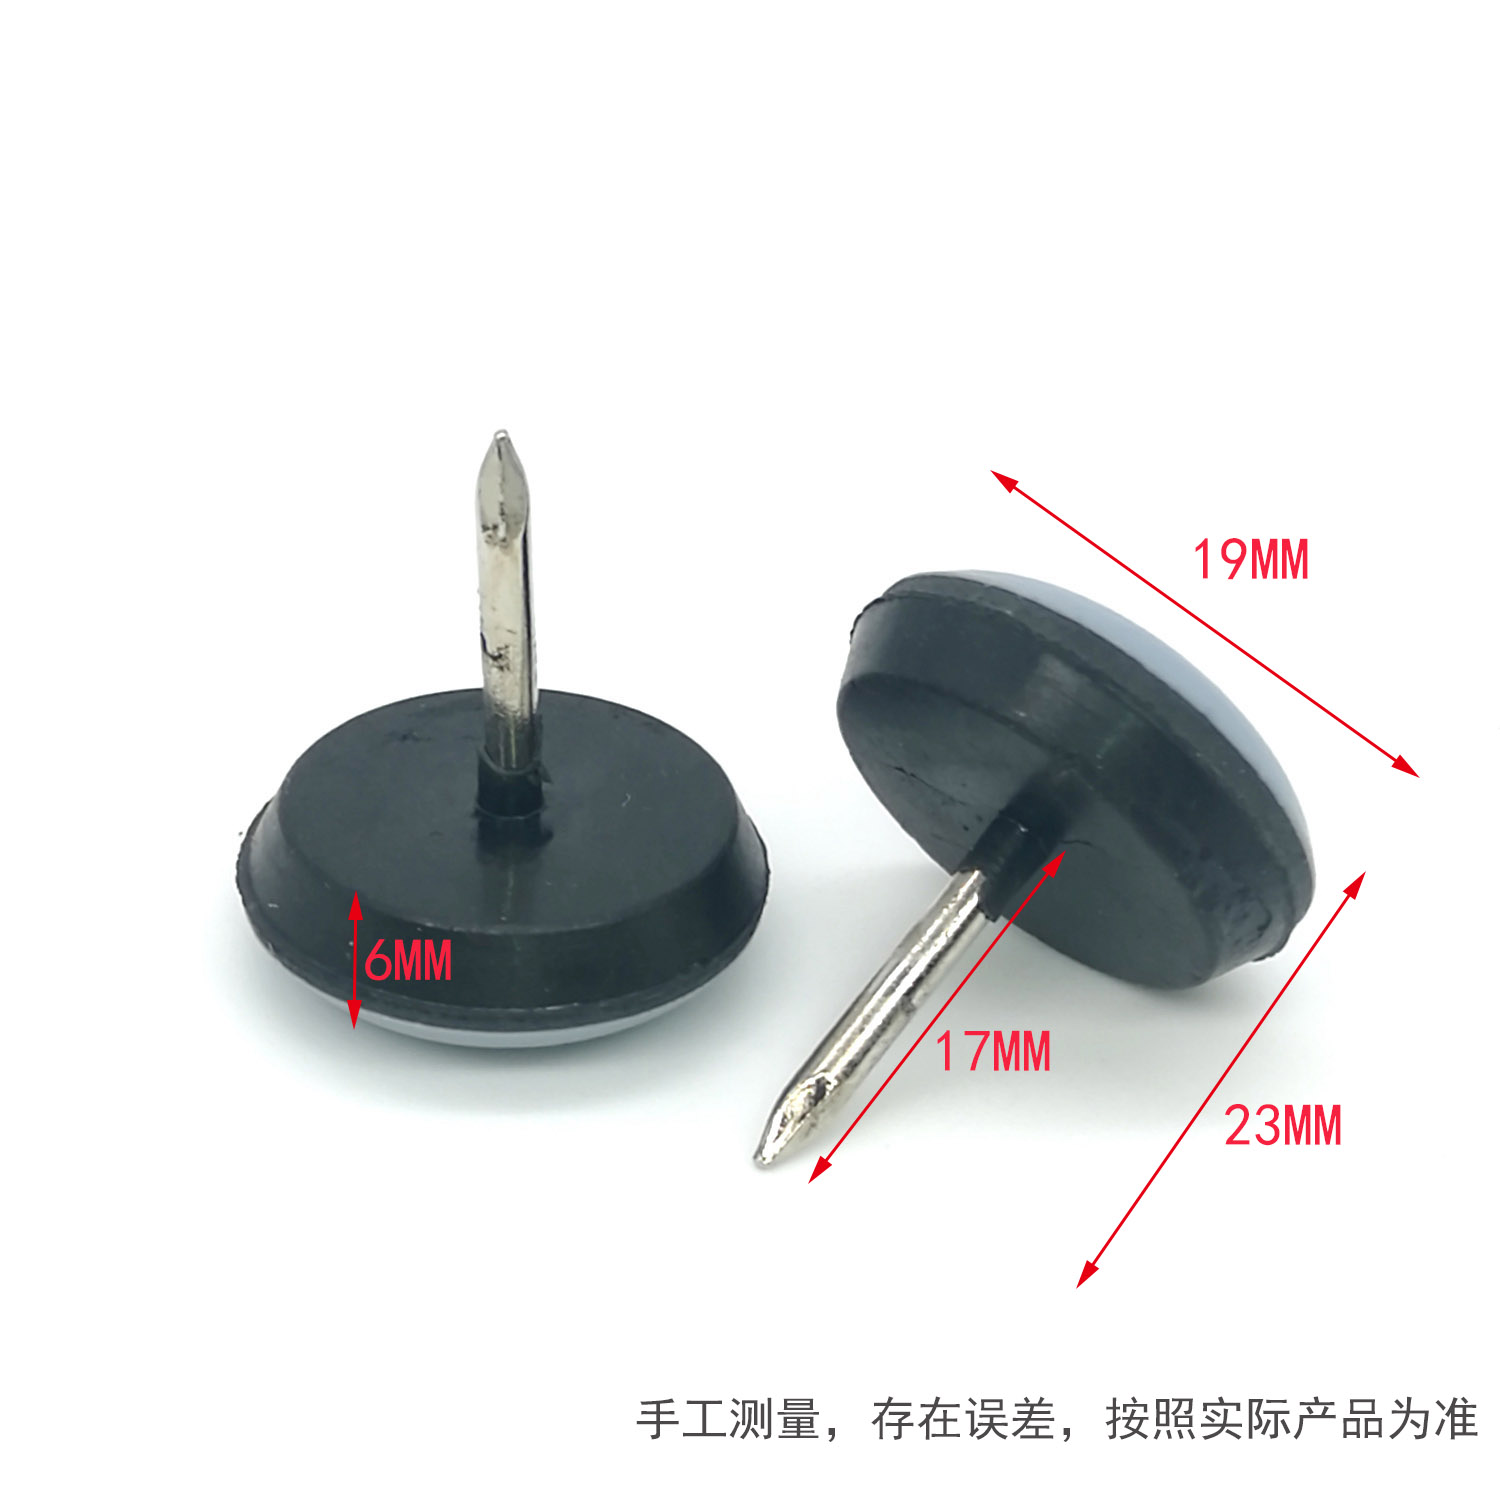 PTFE Easy Teflon Sliders Chair Glides Nail on easy Glides